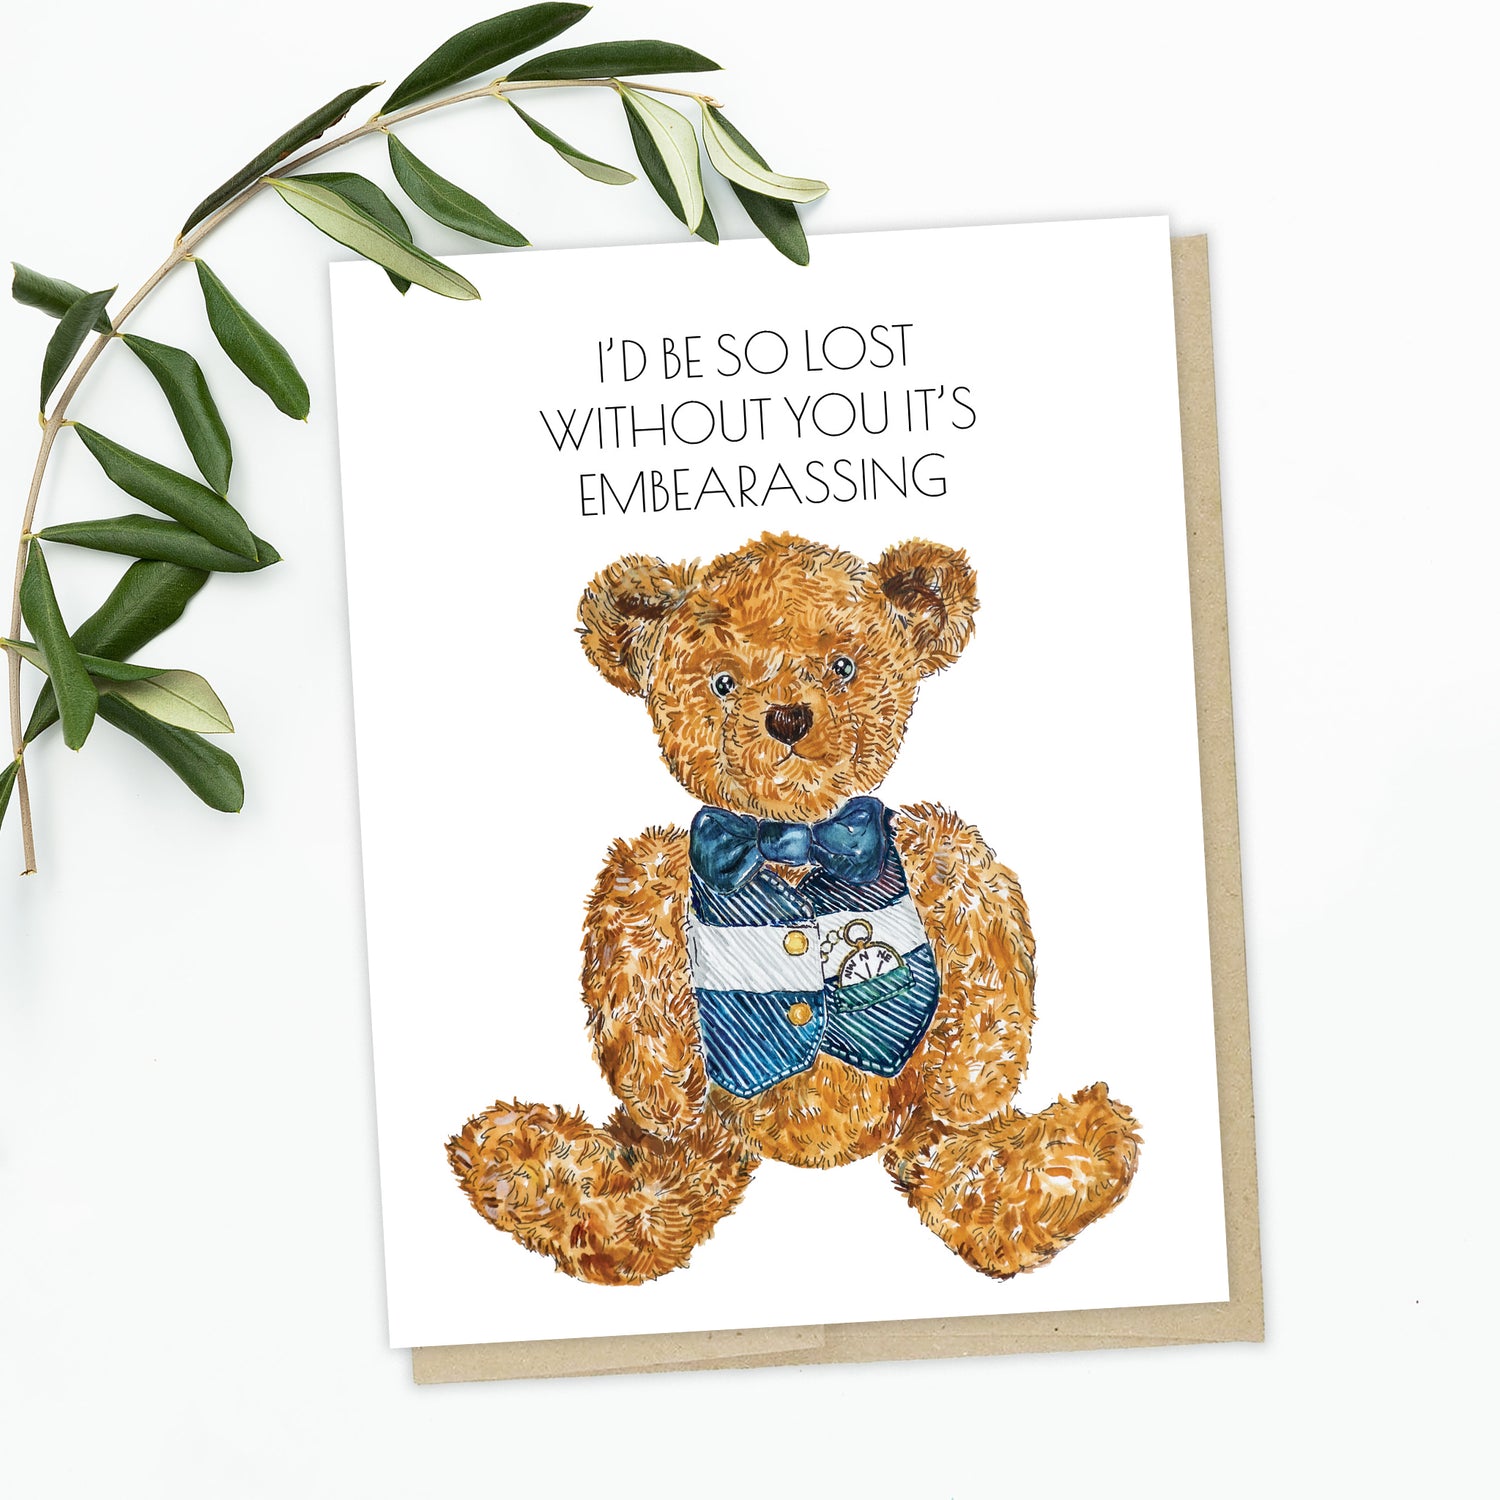 A greeting card with a hand-drawn teddy bear, it says "I'd be so lost without you it's embearassing"